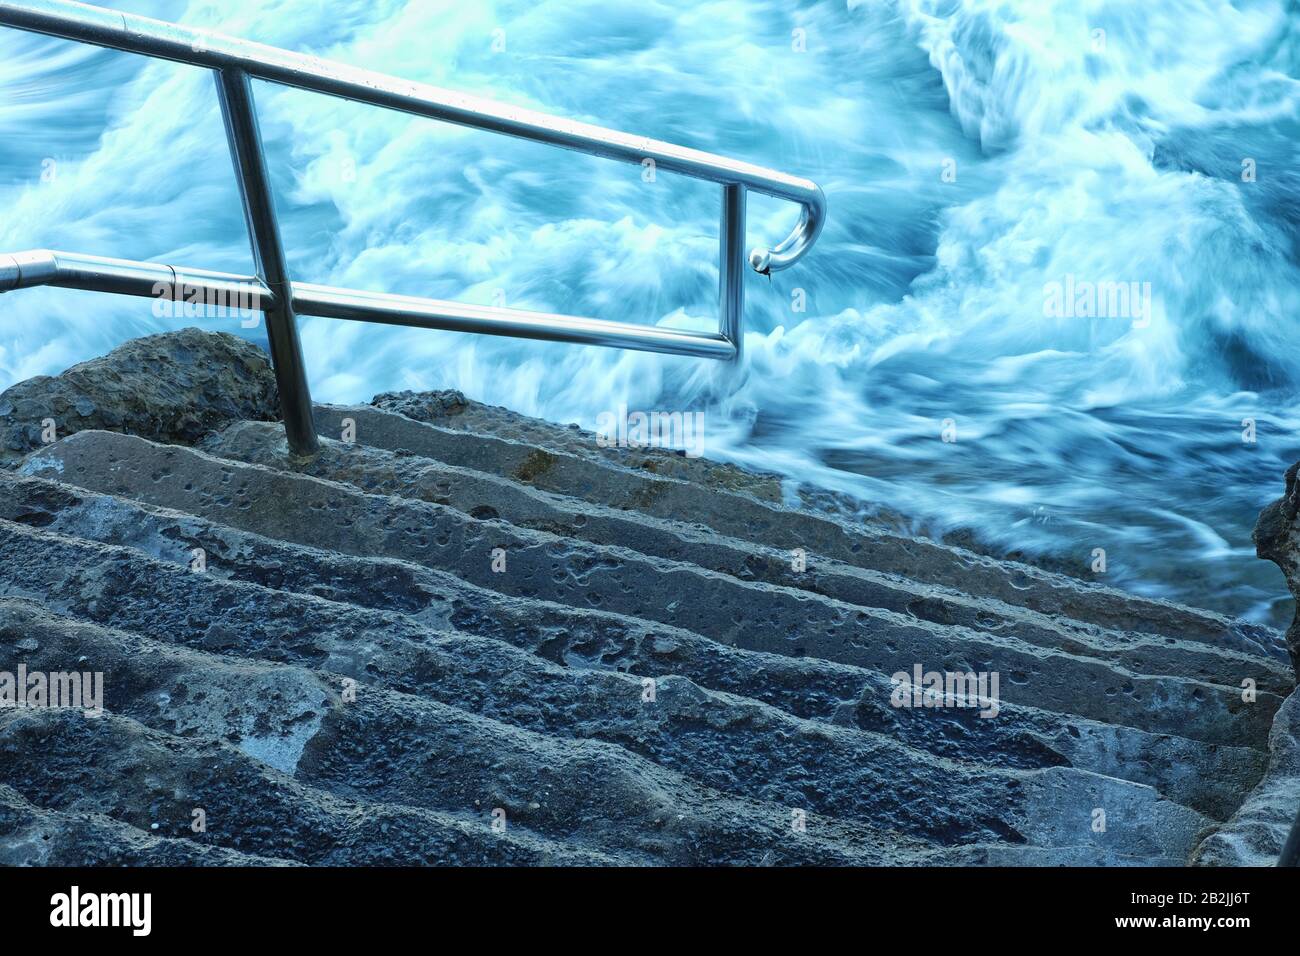 Rolling surging ocean white water, foams and washes around the lower steps and handrail of Giles Bathes, ocean rock pool Coogee Bay, Sydney, Australia Stock Photo